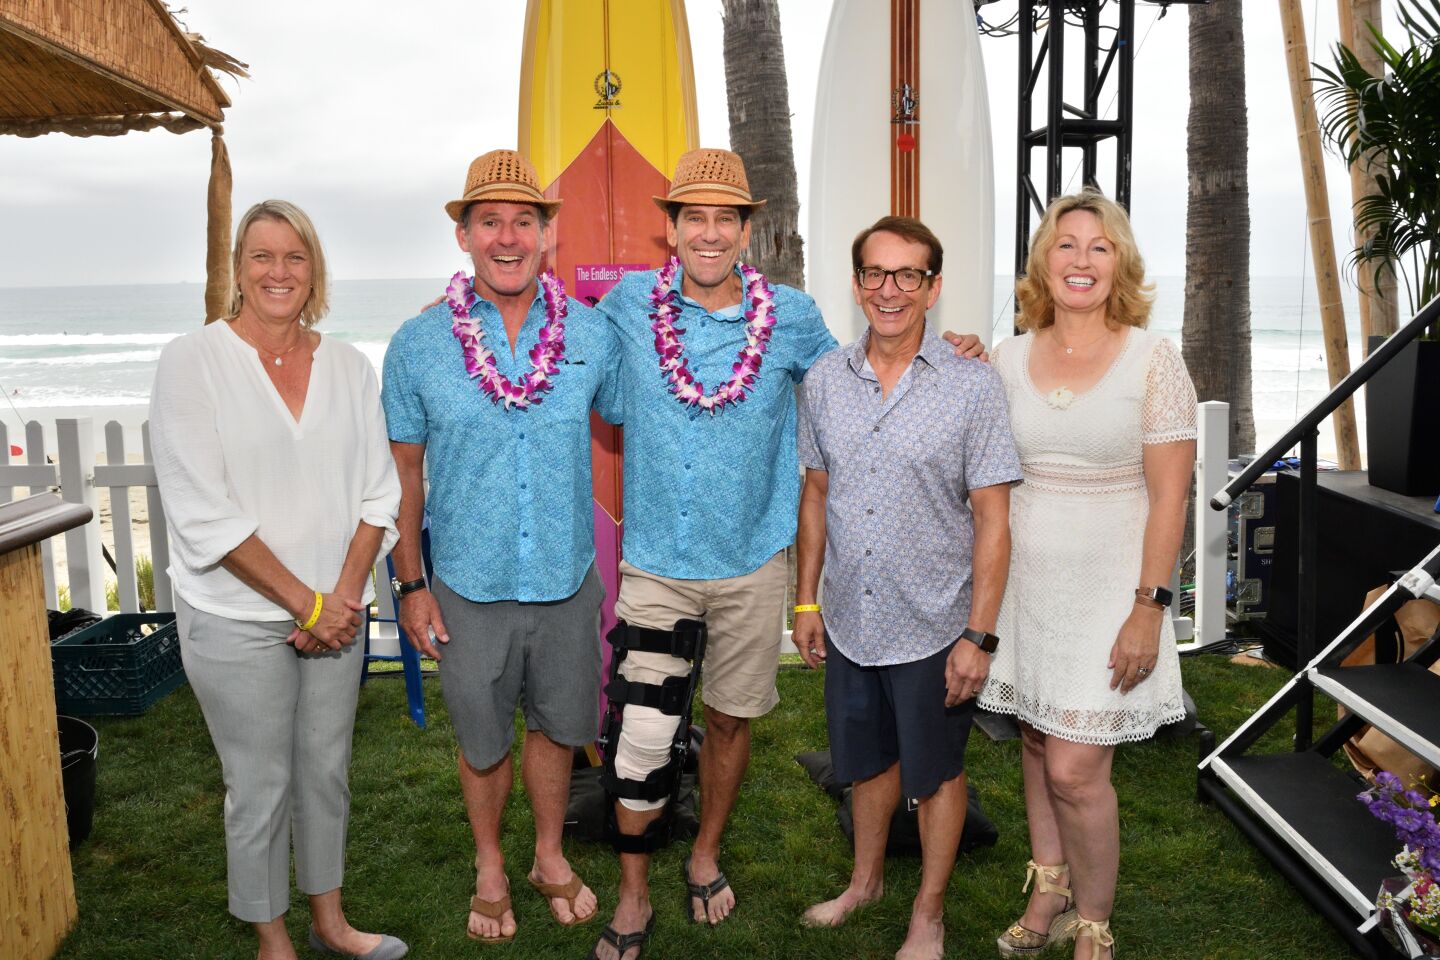 UC San Diego Health Chief Executive Patty Maysent, Luau & Legends of Surfing co-chairmen Jay Hagan and Dr. John Dobak, Rich Heyman and Moores Cancer Center Deputy Director Dr. Catriona Jamieson